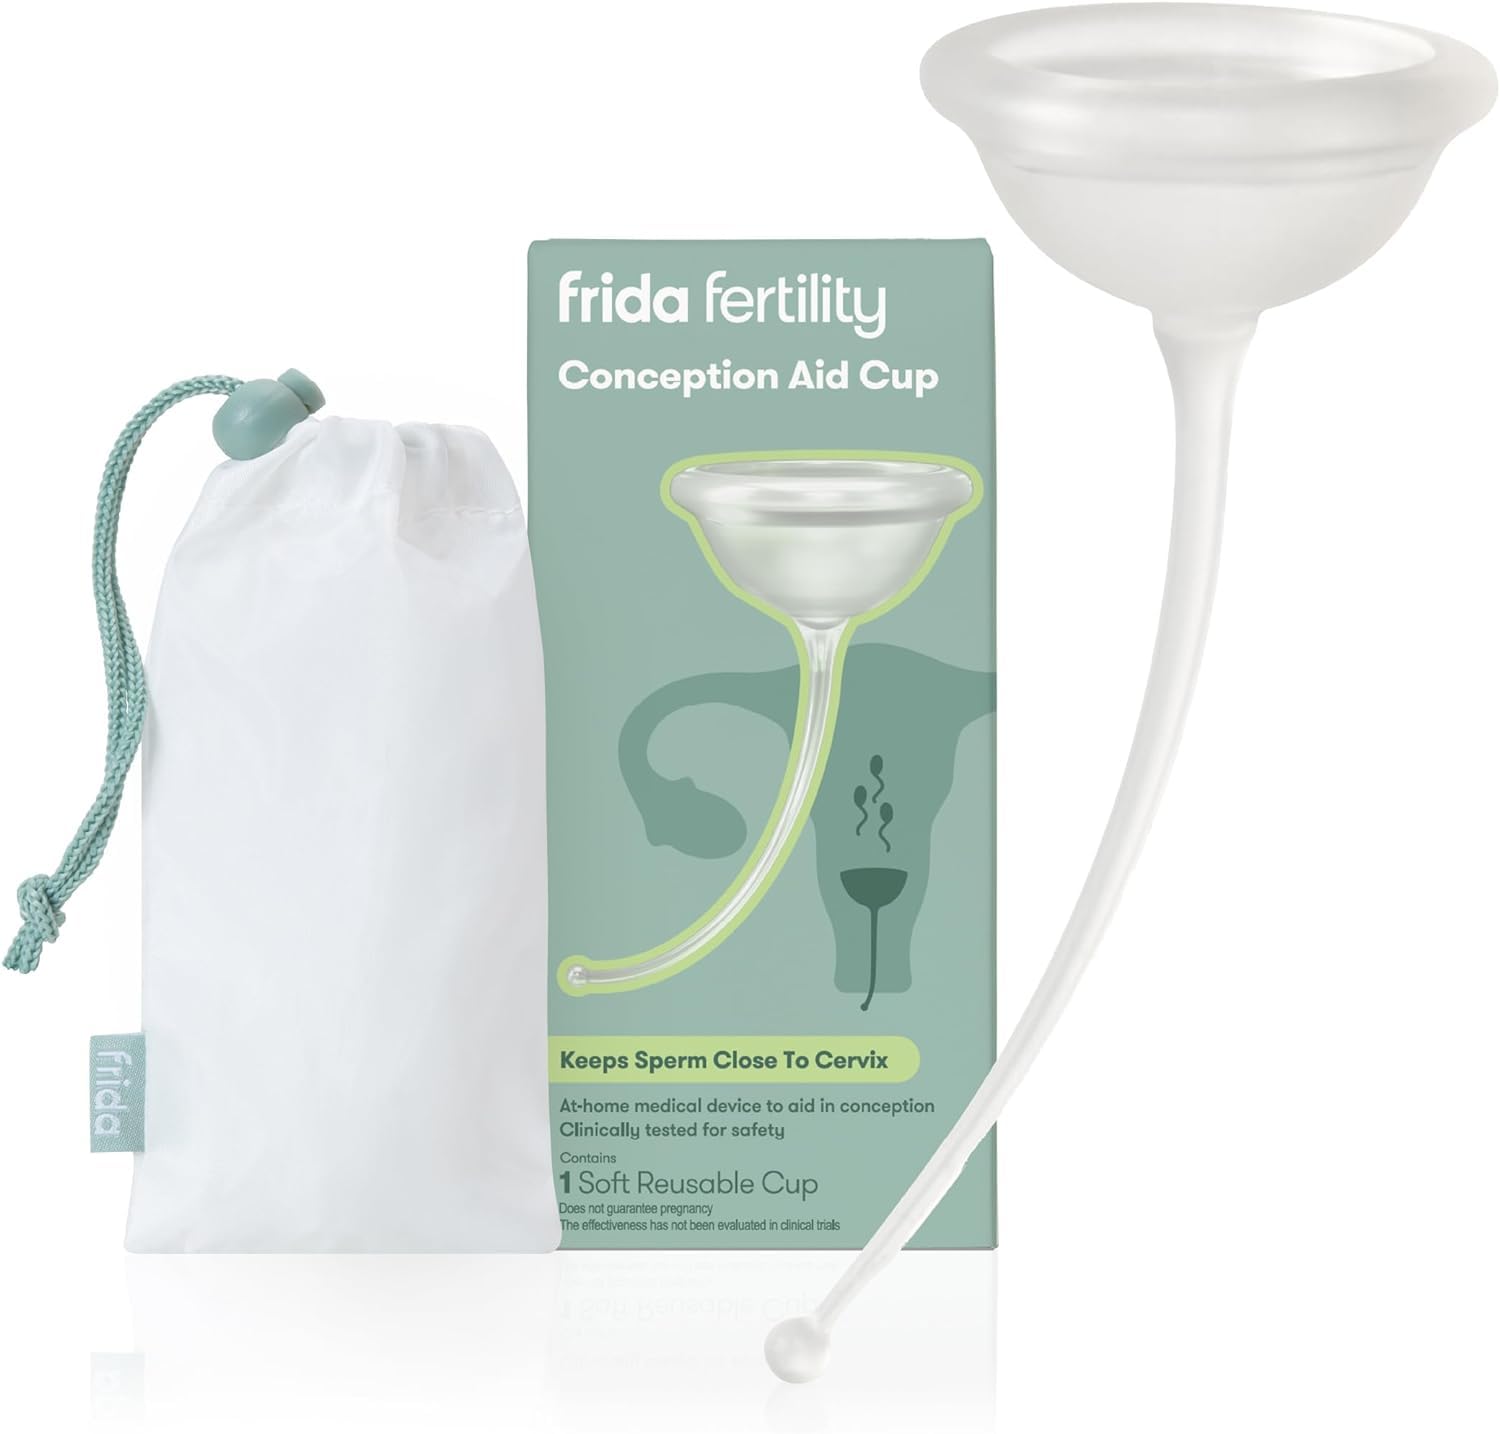 Frida Fertility Conception Aid Cup, Natural Conception Aid Cup for Fertility Support | Aids in Conception for Women + Keeping Sperm Close to Cervix| Reusable with Storage Bag| Soft + Flexible Silicone